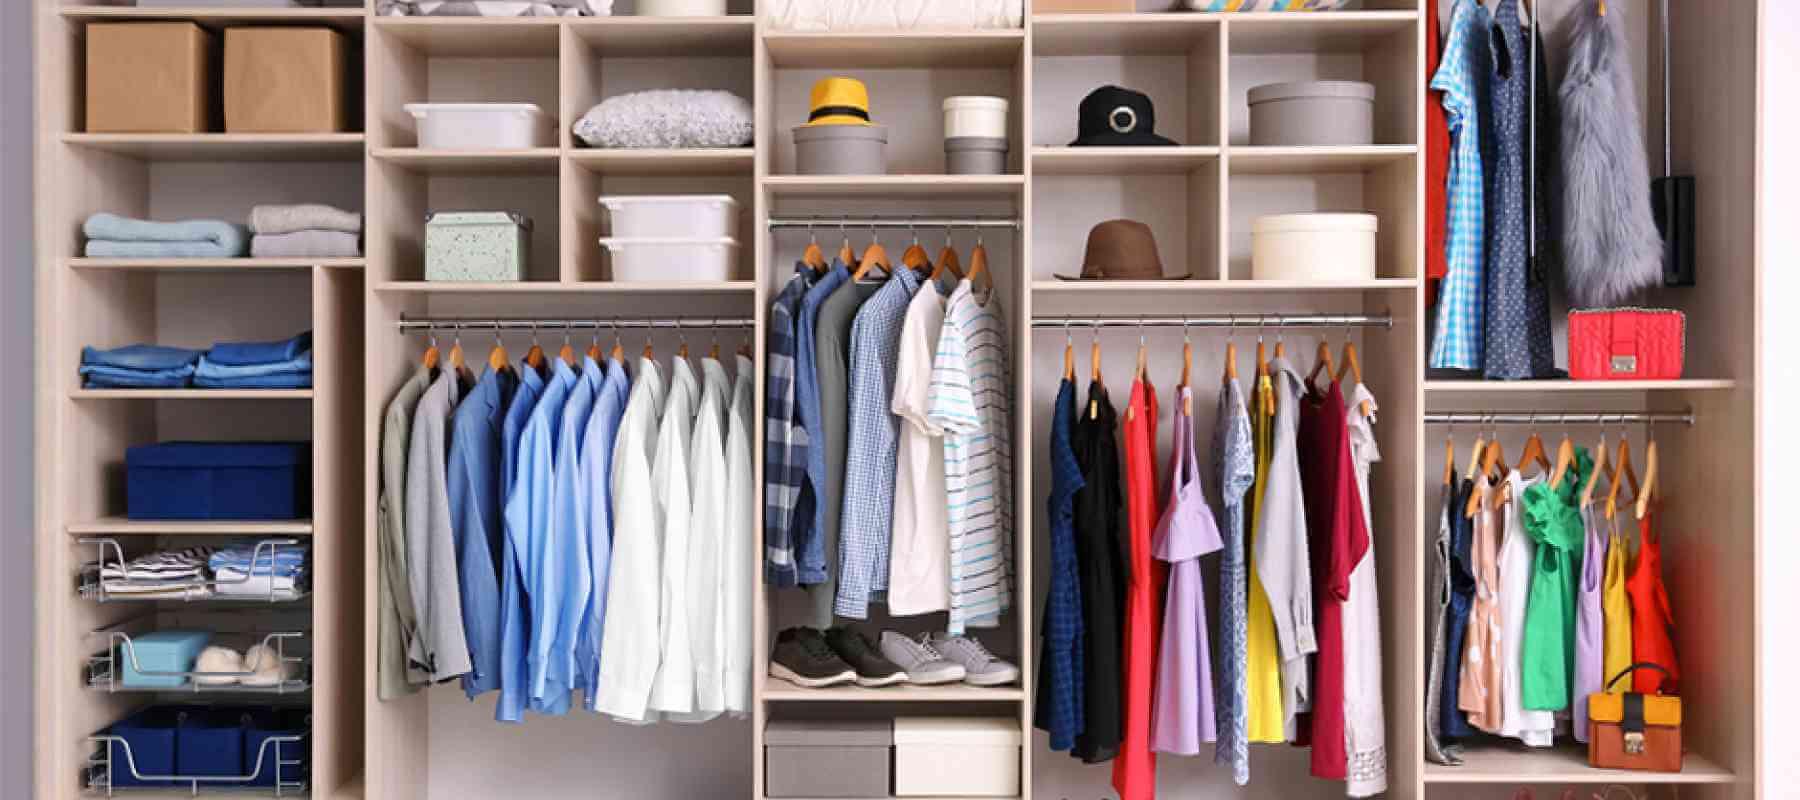 Another way to Organize Your Closet